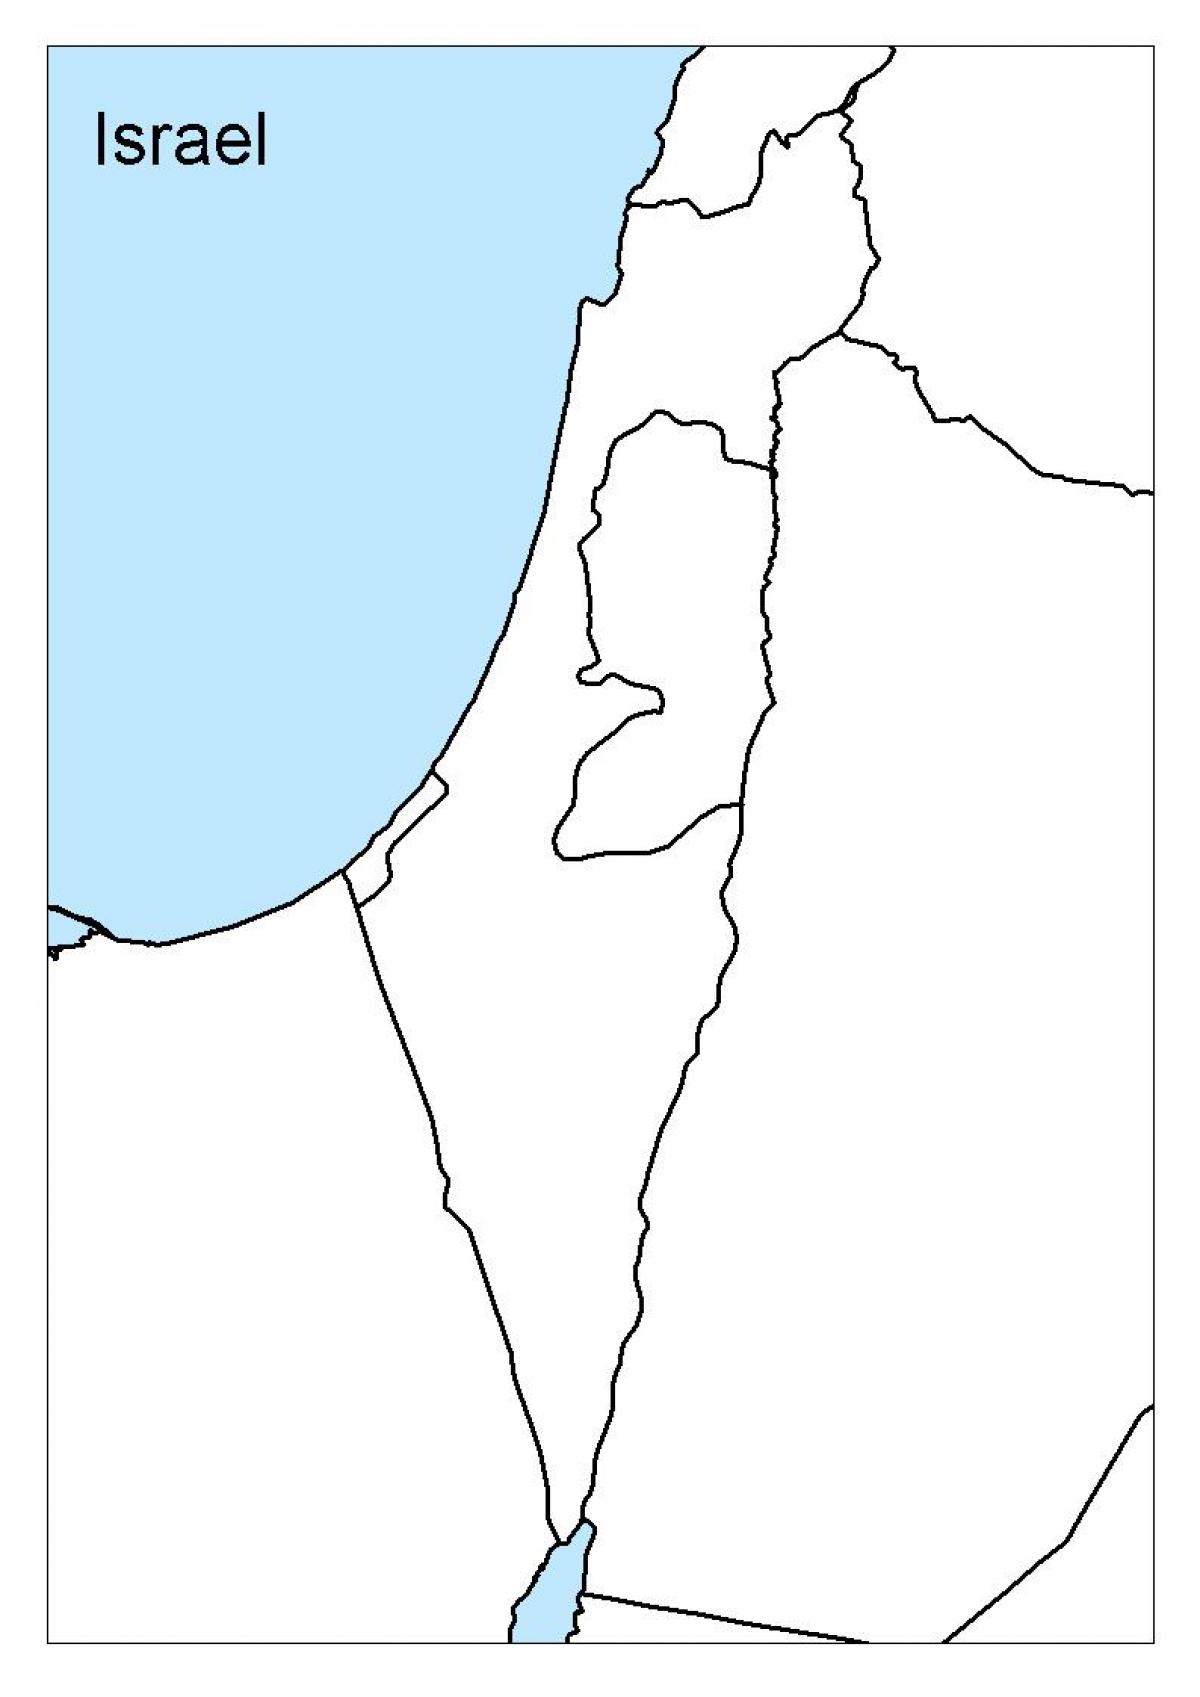 Israel contours map